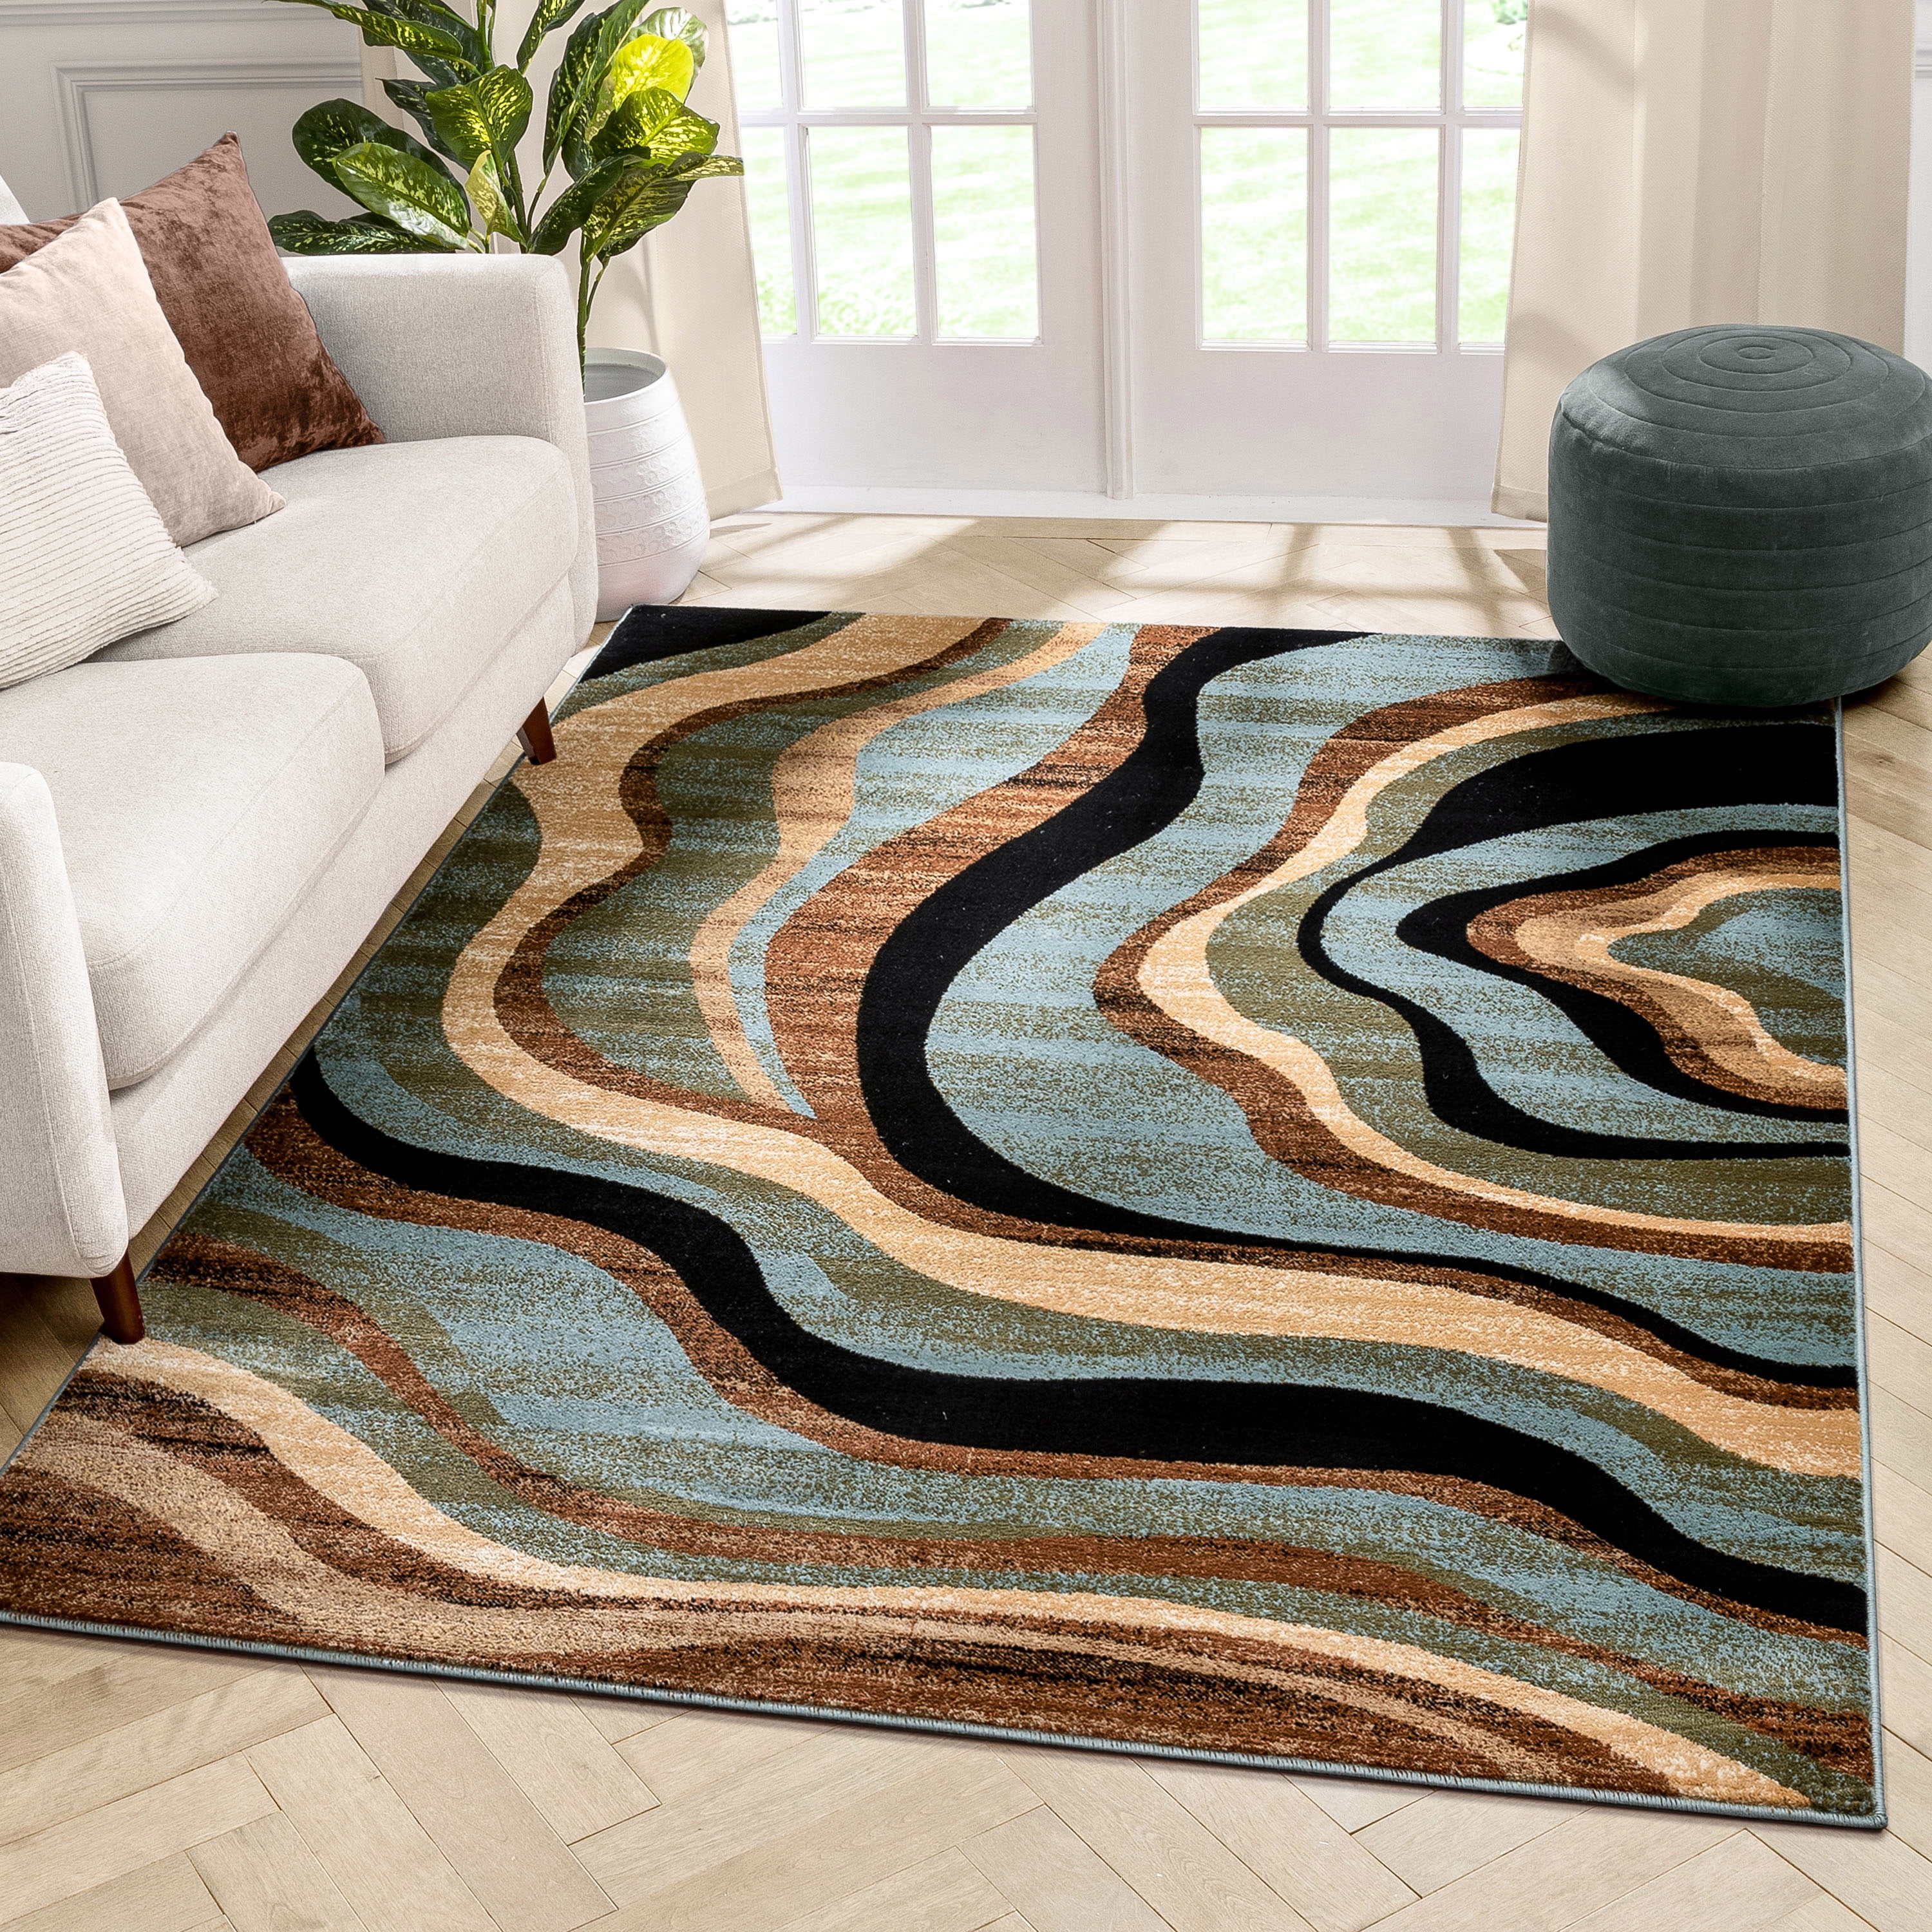 Well Woven Barclay Nirvana Waves Modern, Contemporary Flat Weave Rugs 8×10